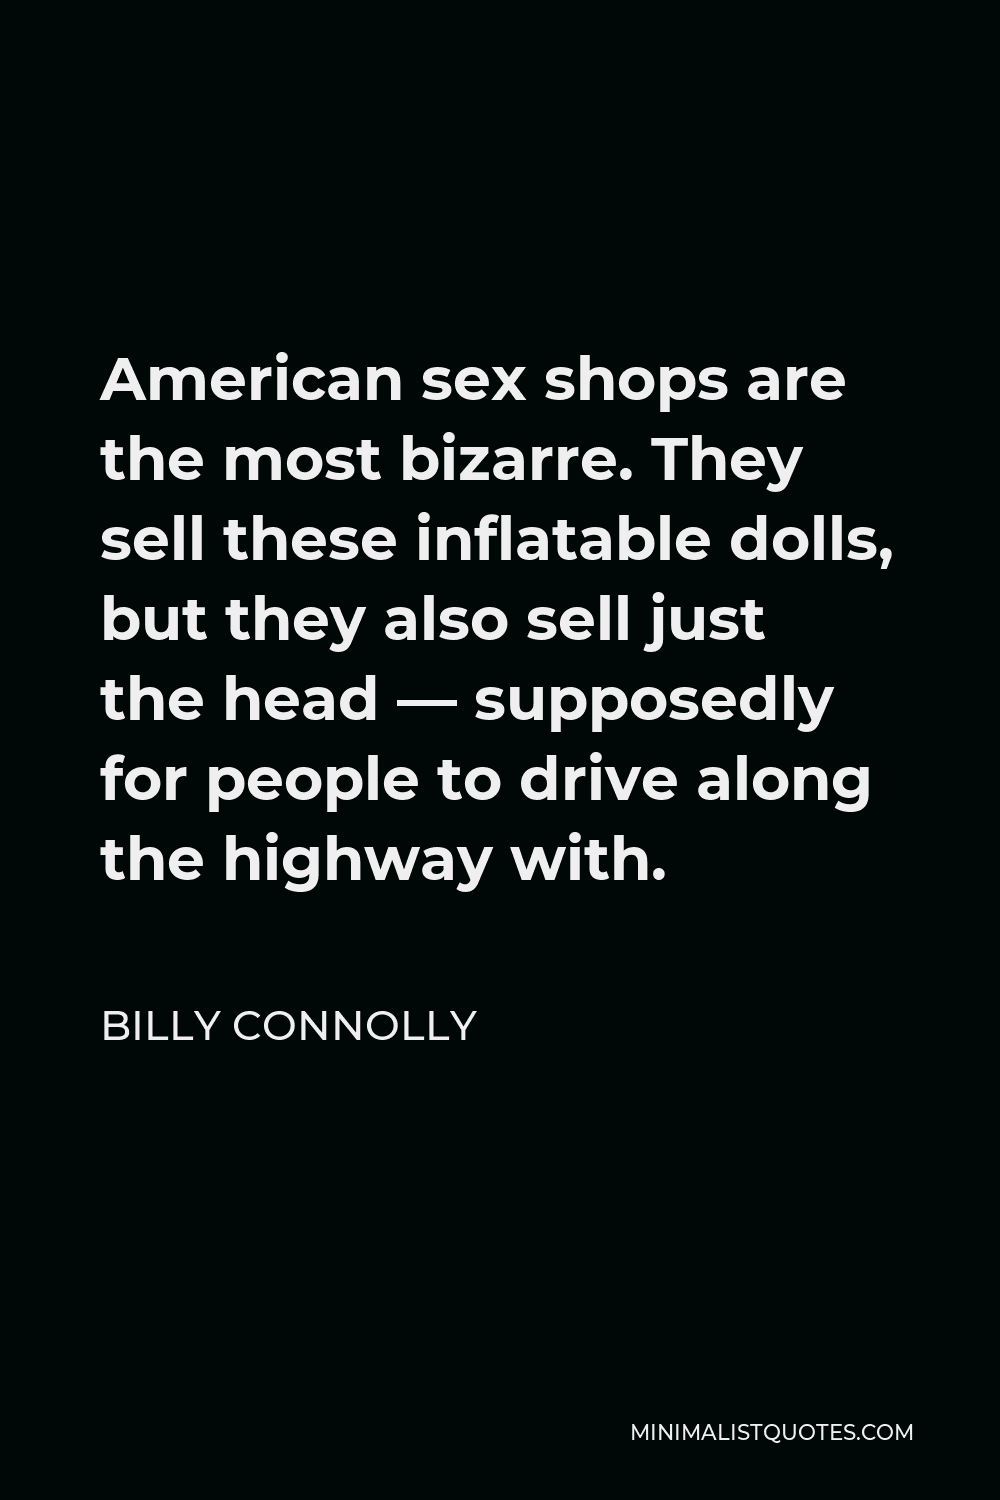 Billy Connolly Quote - American sex shops are the most bizarre. They sell these inflatable dolls, but they also sell just the head — supposedly for people to drive along the highway with.